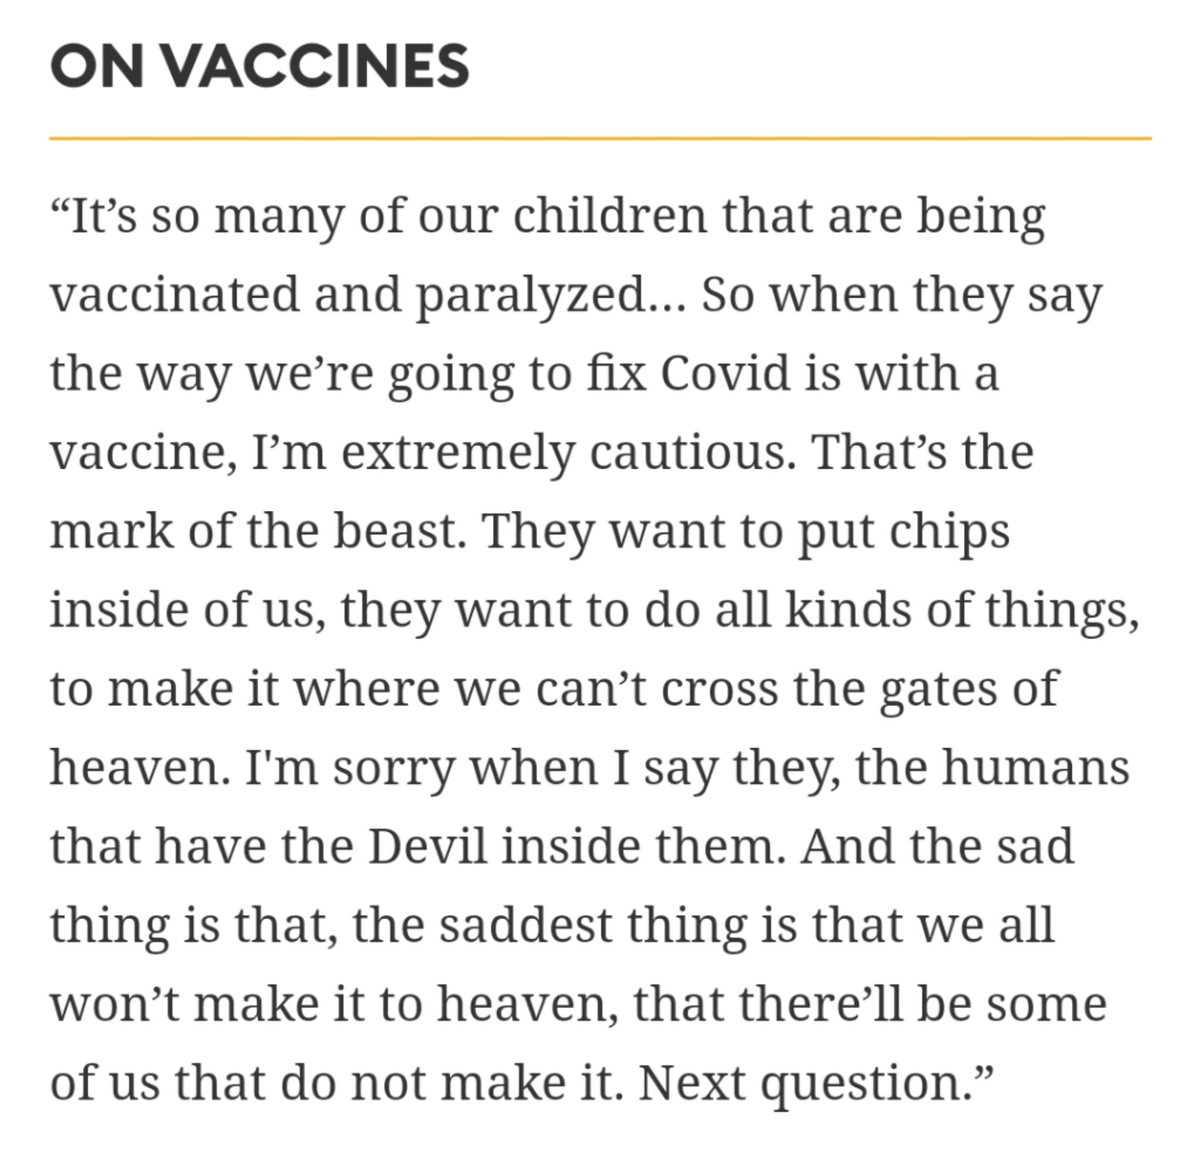 Oh, good. Another anti-vaxxer spreading bullshit and unfounded conspiracy theories. Great...